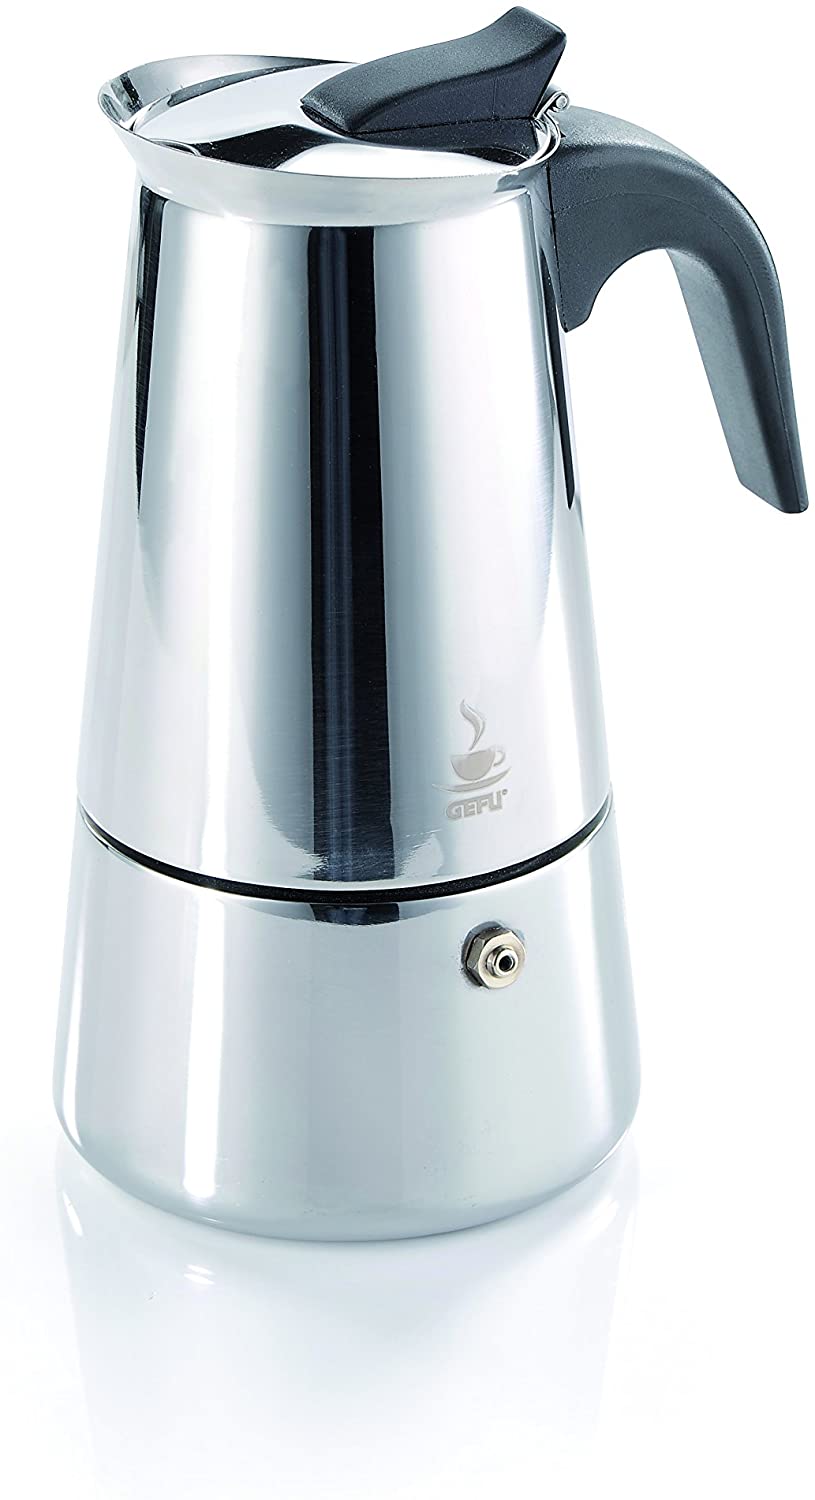 Gefu Espresso Maker Emilio, for Coffee, Suitable for Induction, Stainless Steel/ Plastic, 4 Cups, 16150